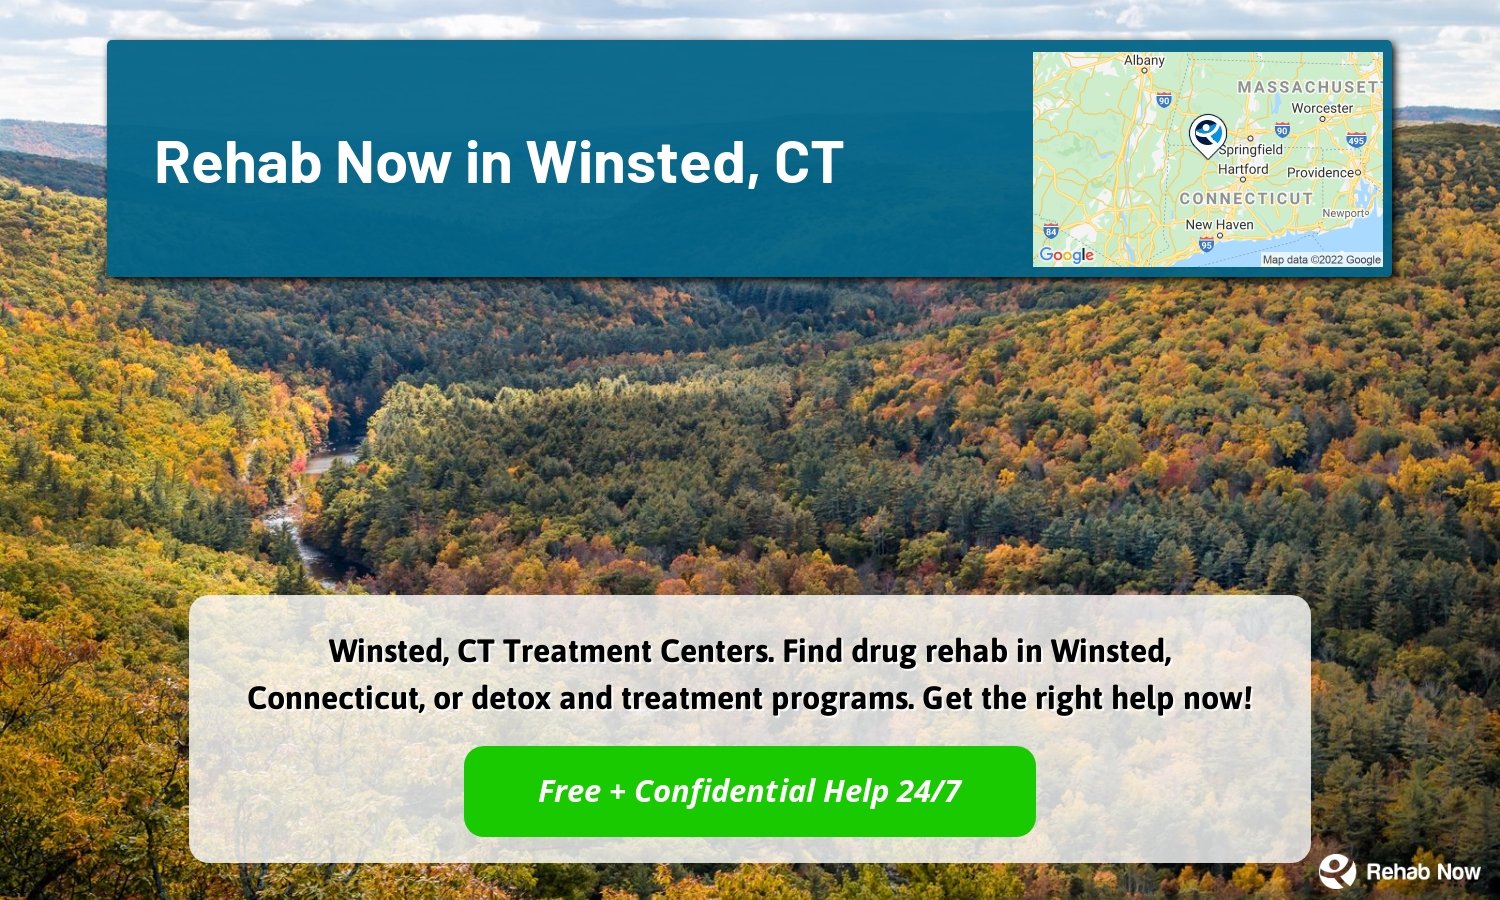 Winsted, CT Treatment Centers. Find drug rehab in Winsted, Connecticut, or detox and treatment programs. Get the right help now!